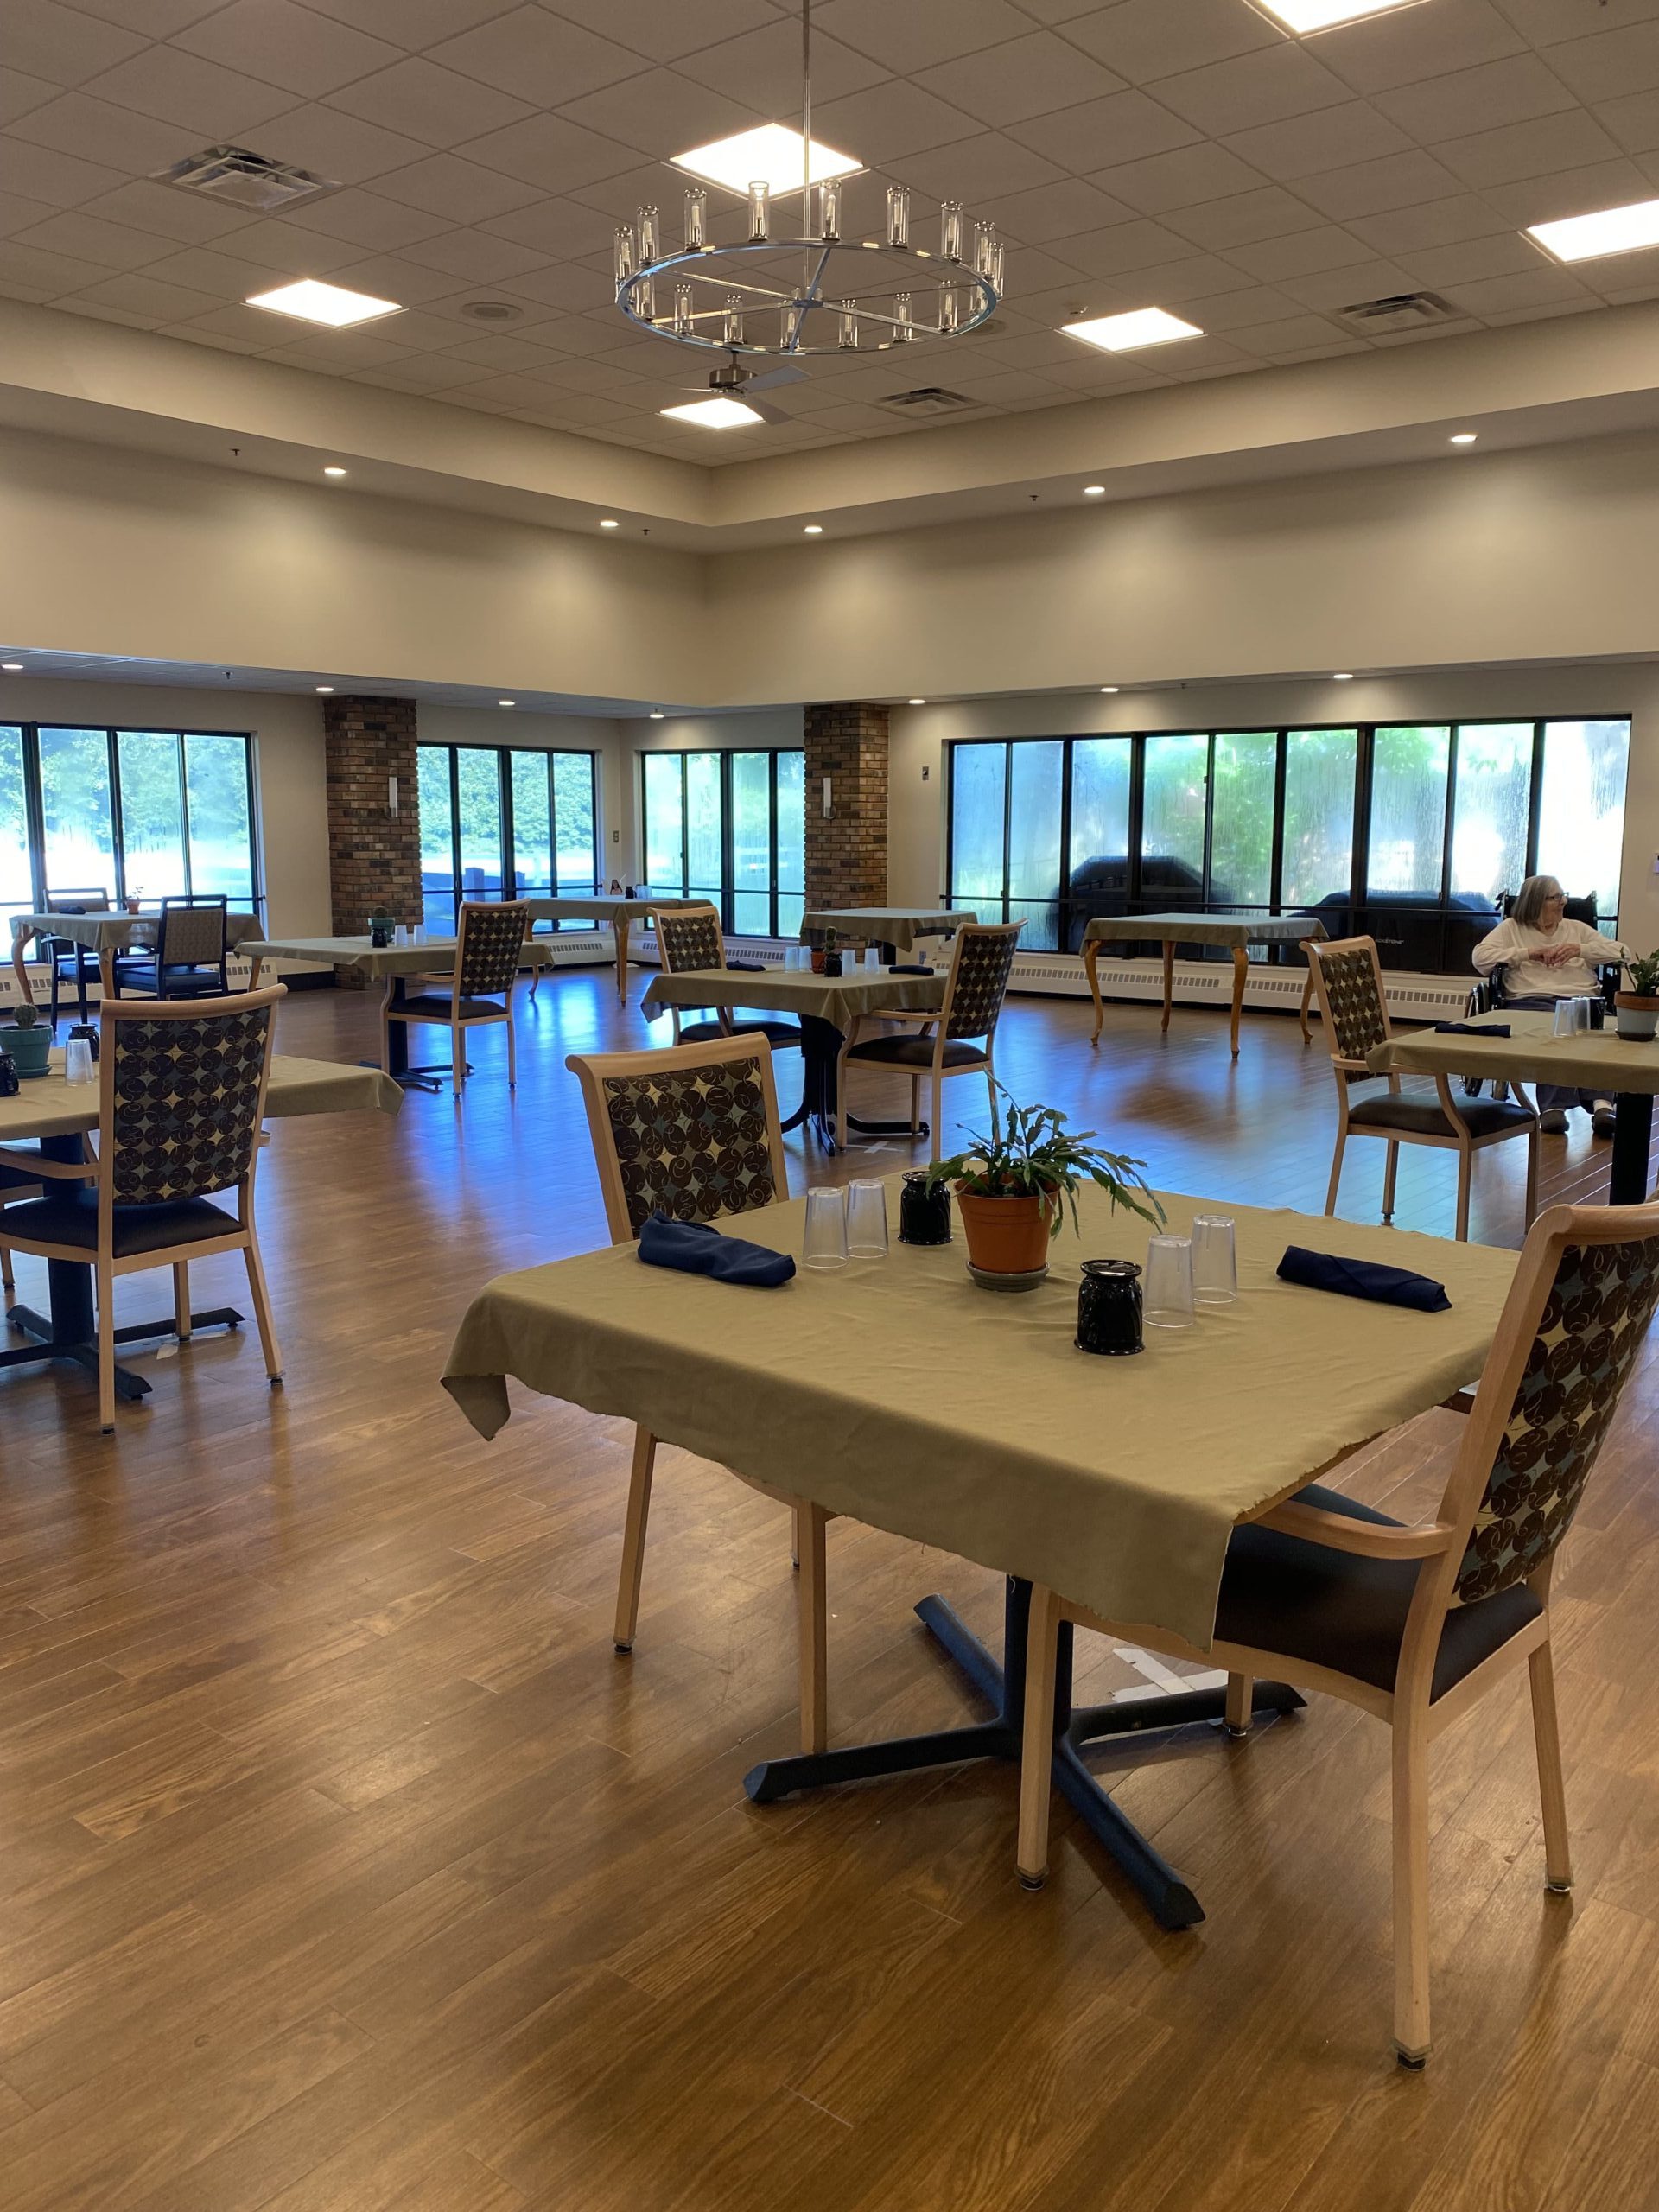 Brickyard Healthcare Fountainview Care Center dining area with tables and chairs